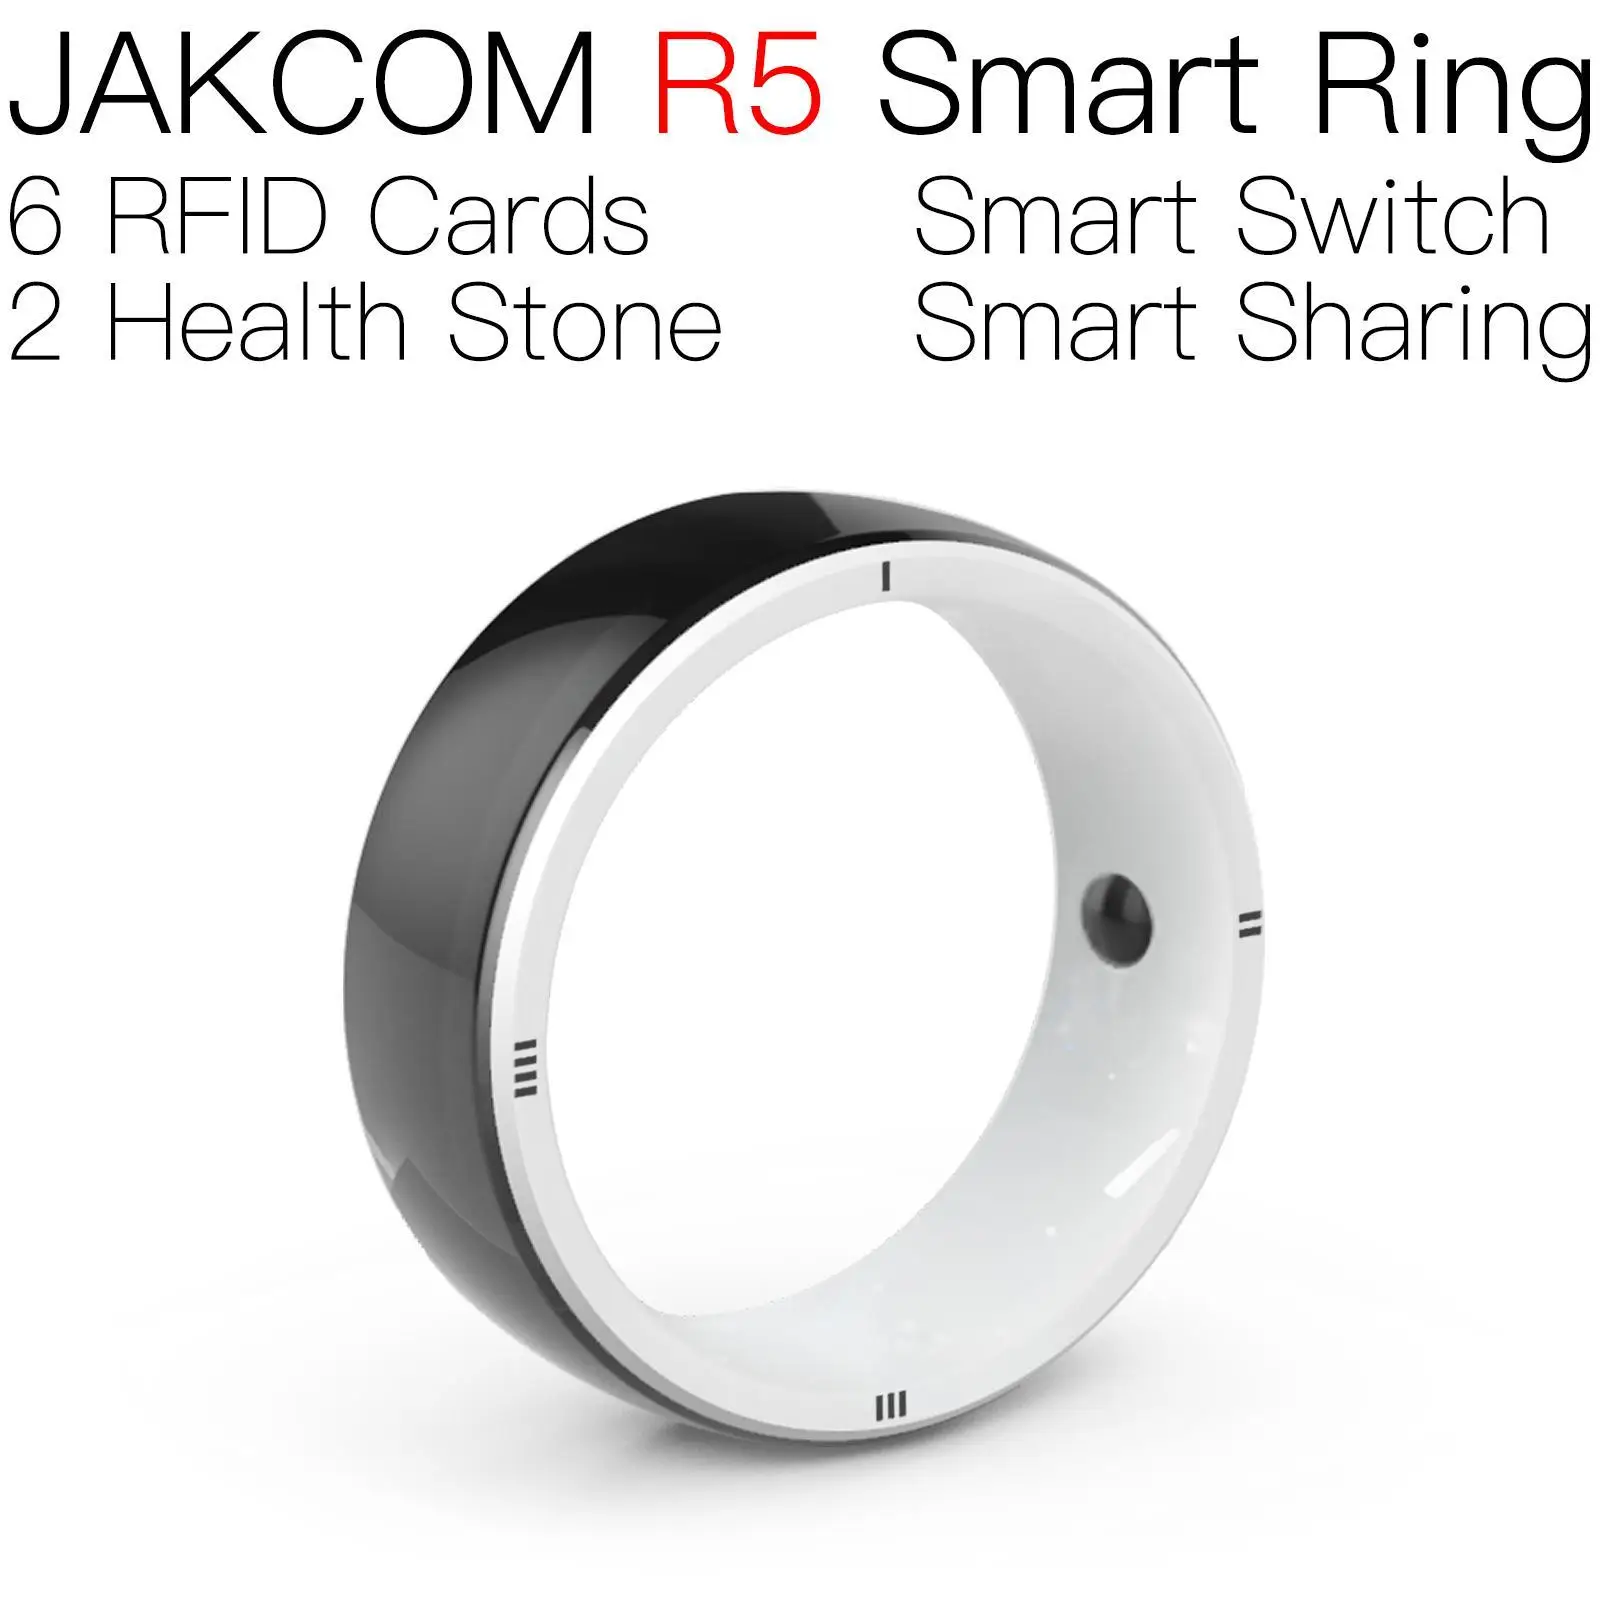 

JAKCOM R5 Smart Ring Nice than linear actuator 12v waterproof rfid cables ic2 waste ink chip f170 door contactless library est